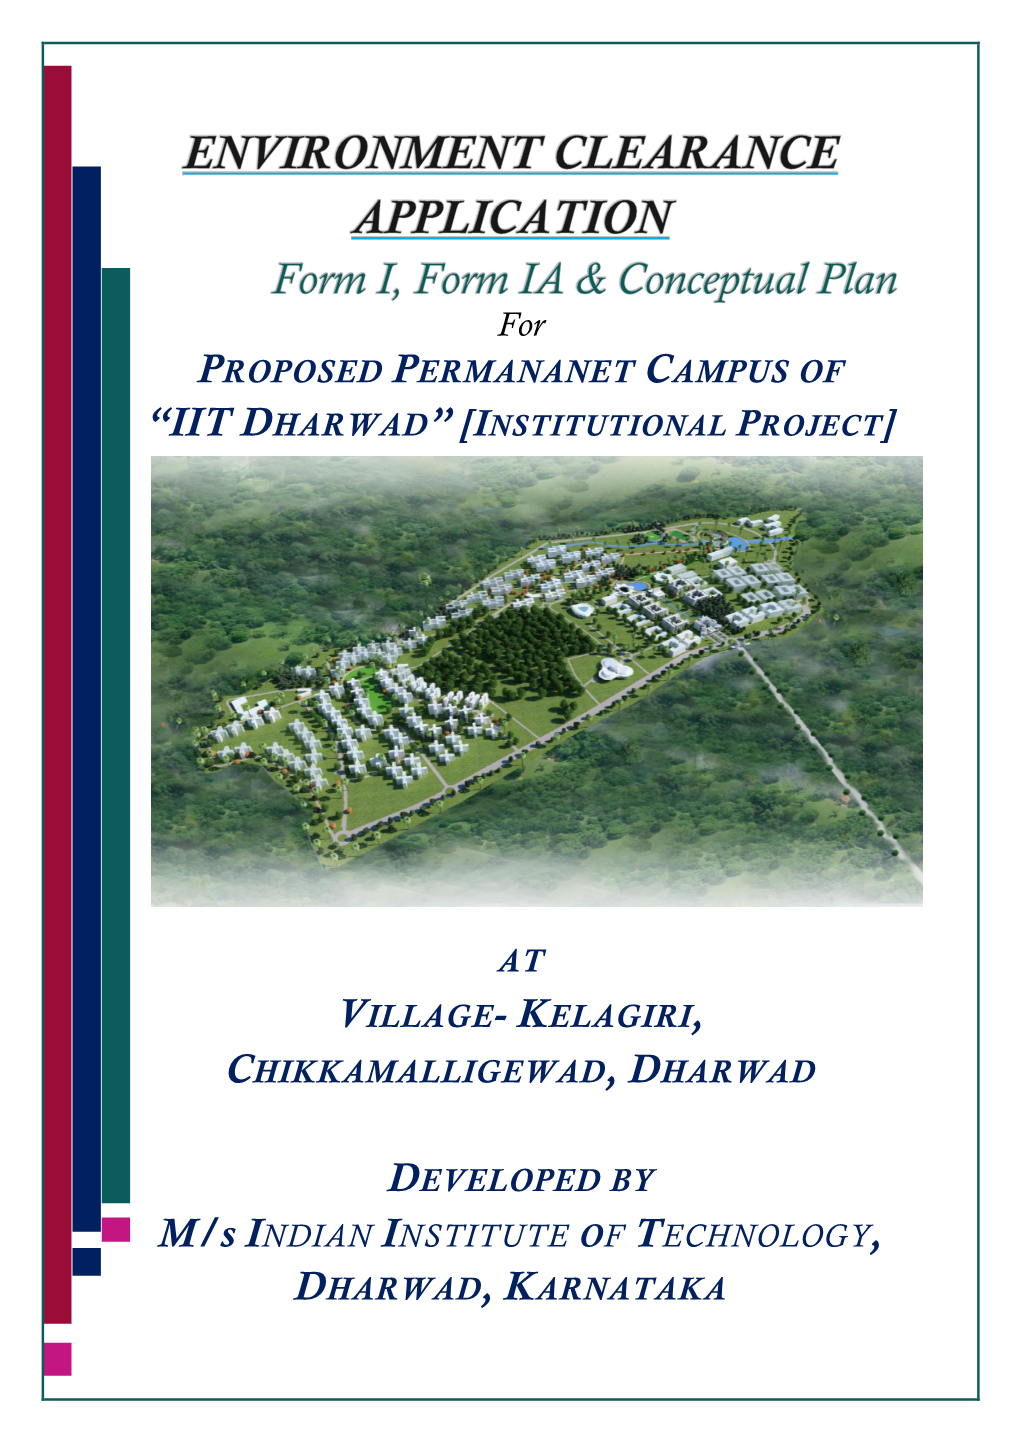 Proposed Permananet Campus of at Village